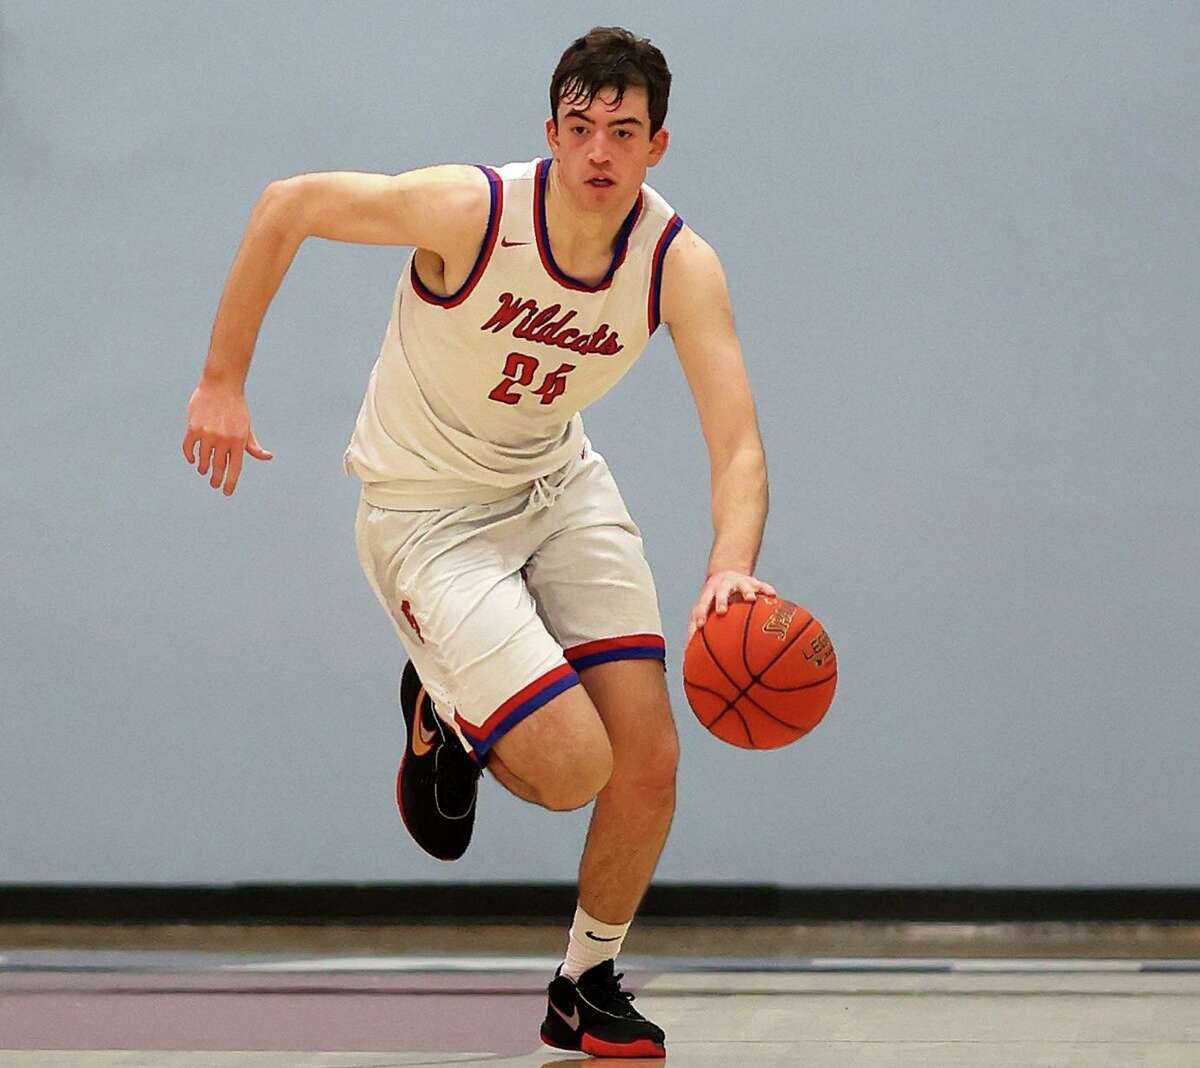 John Squire, a Chronicle 2021-22 All-Metro player, and his St. Ignatius teammates will play Sacred Heart Cathedral on Tuesday at USF in the Bruce Mahoney Game.